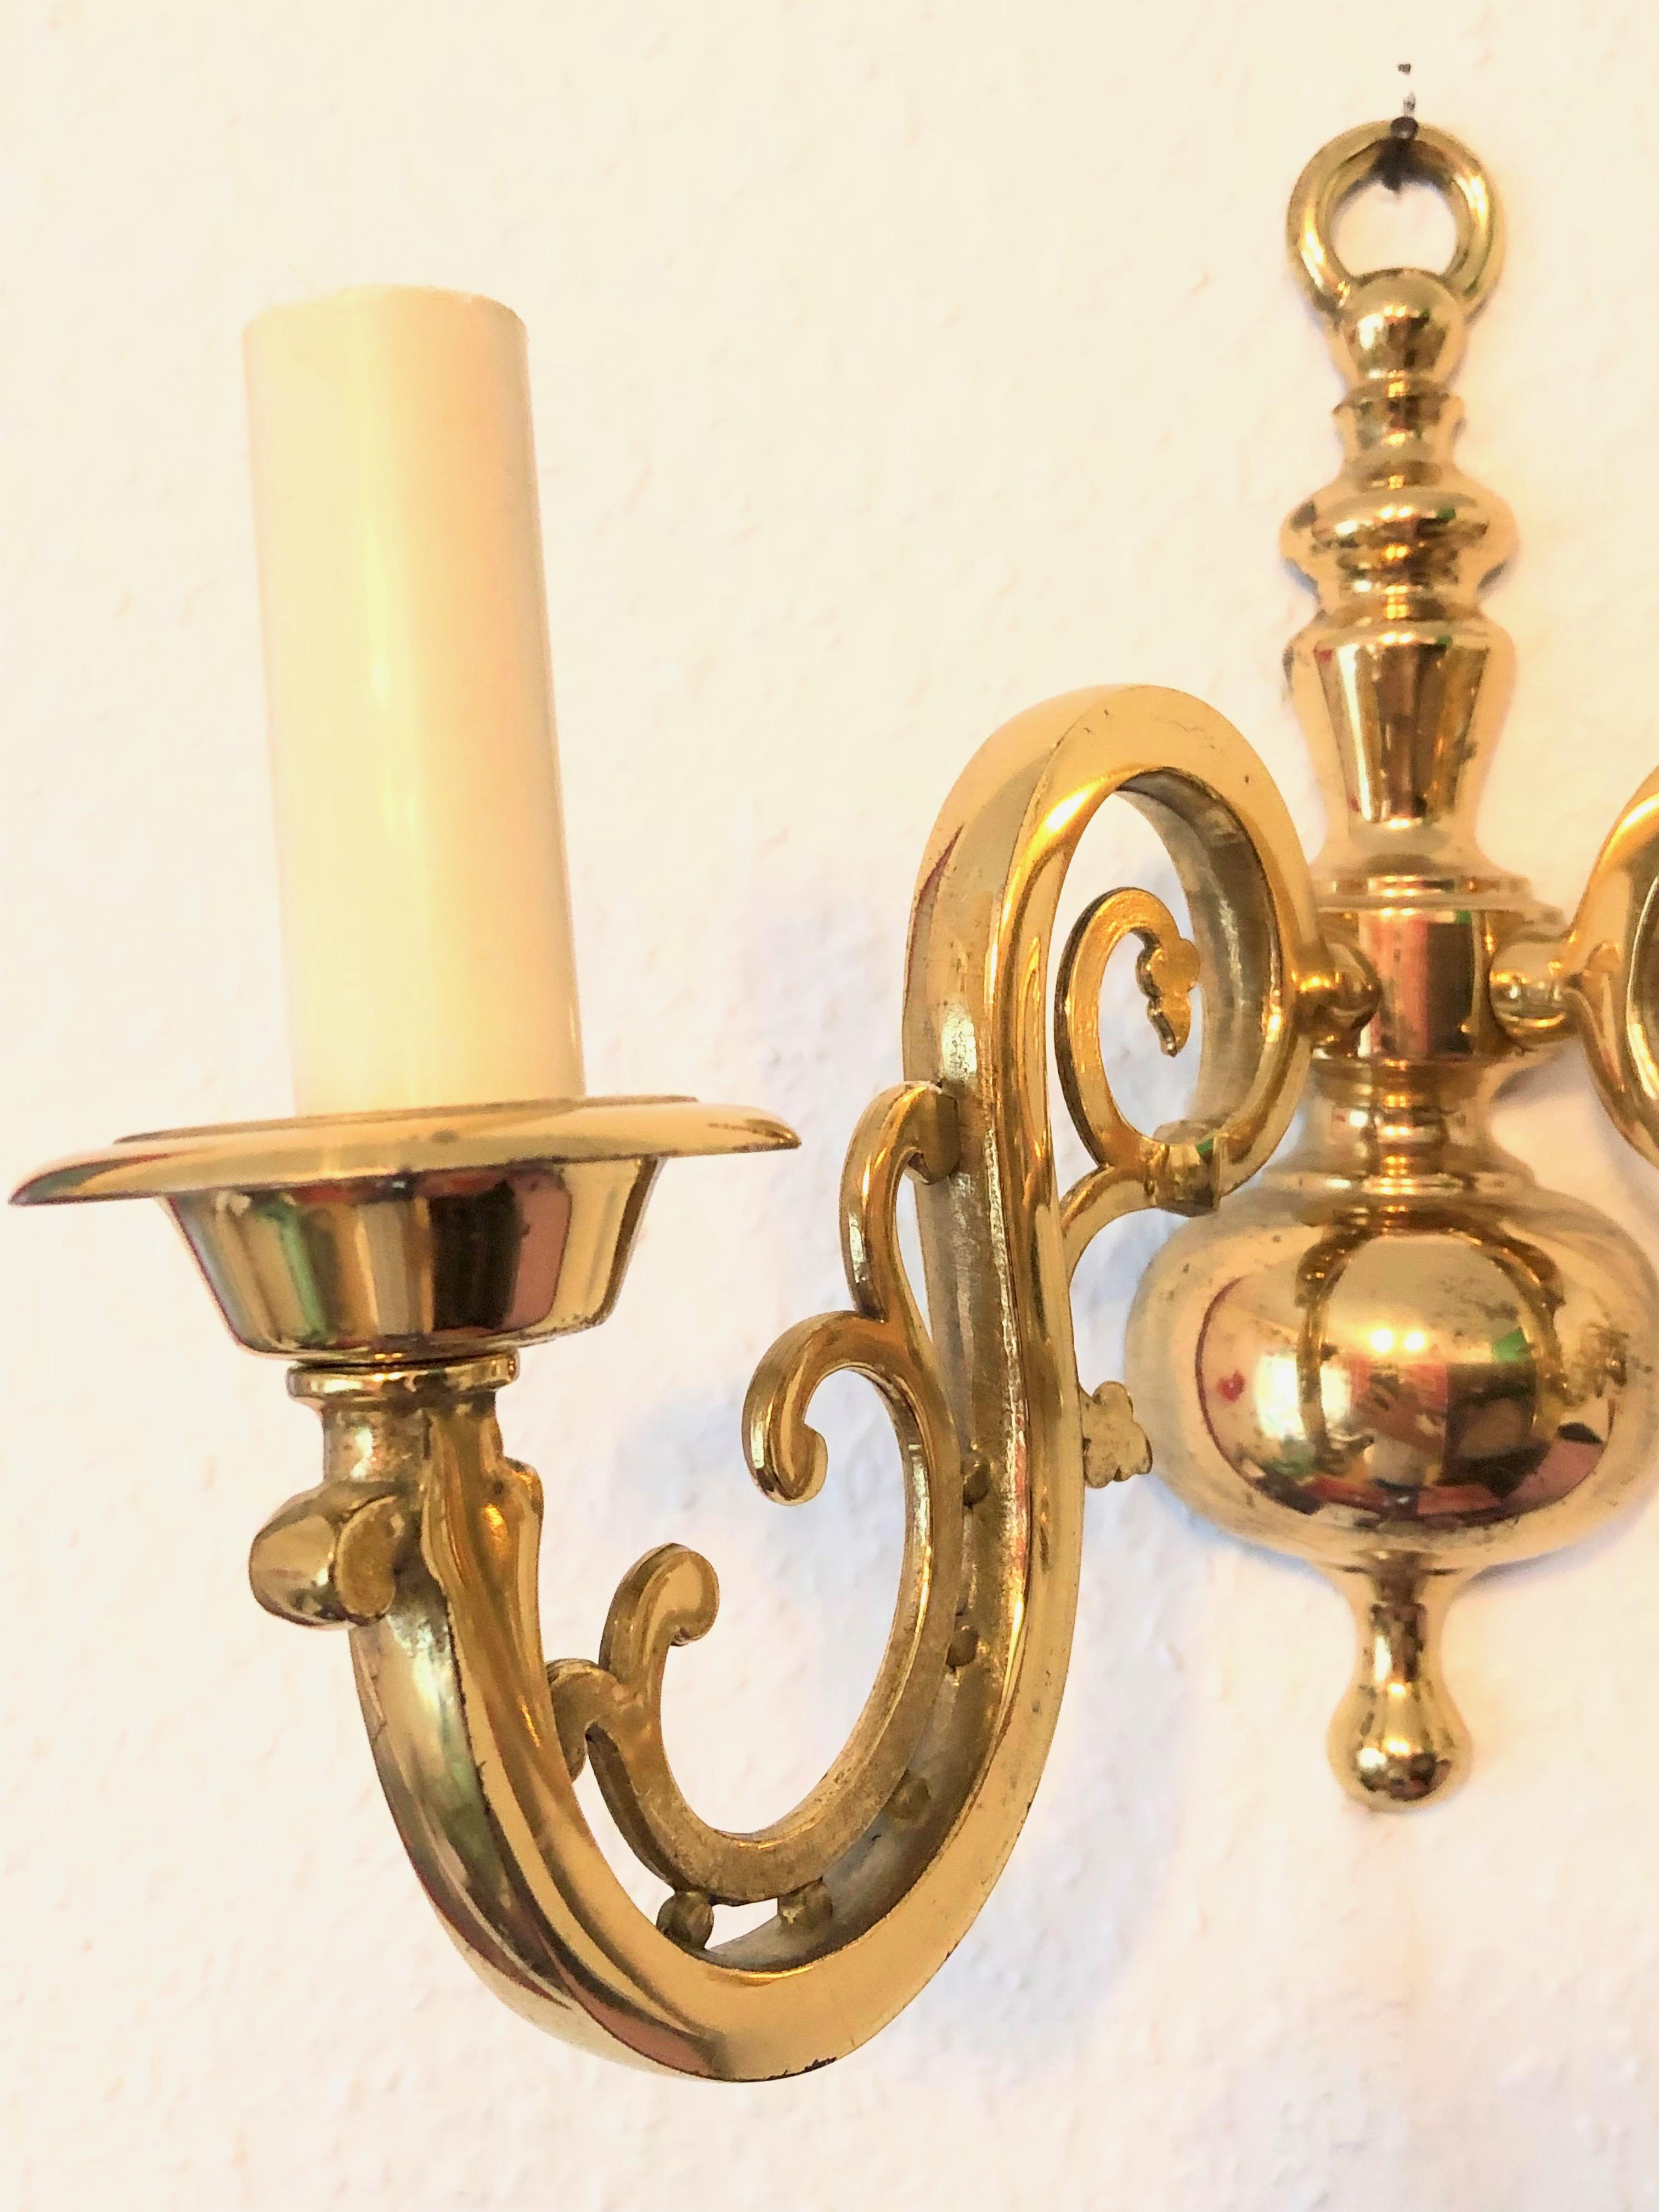 Mid-20th Century Pair of Solid Brass Two-Light Wall Sconces, Vintage German, 1960s